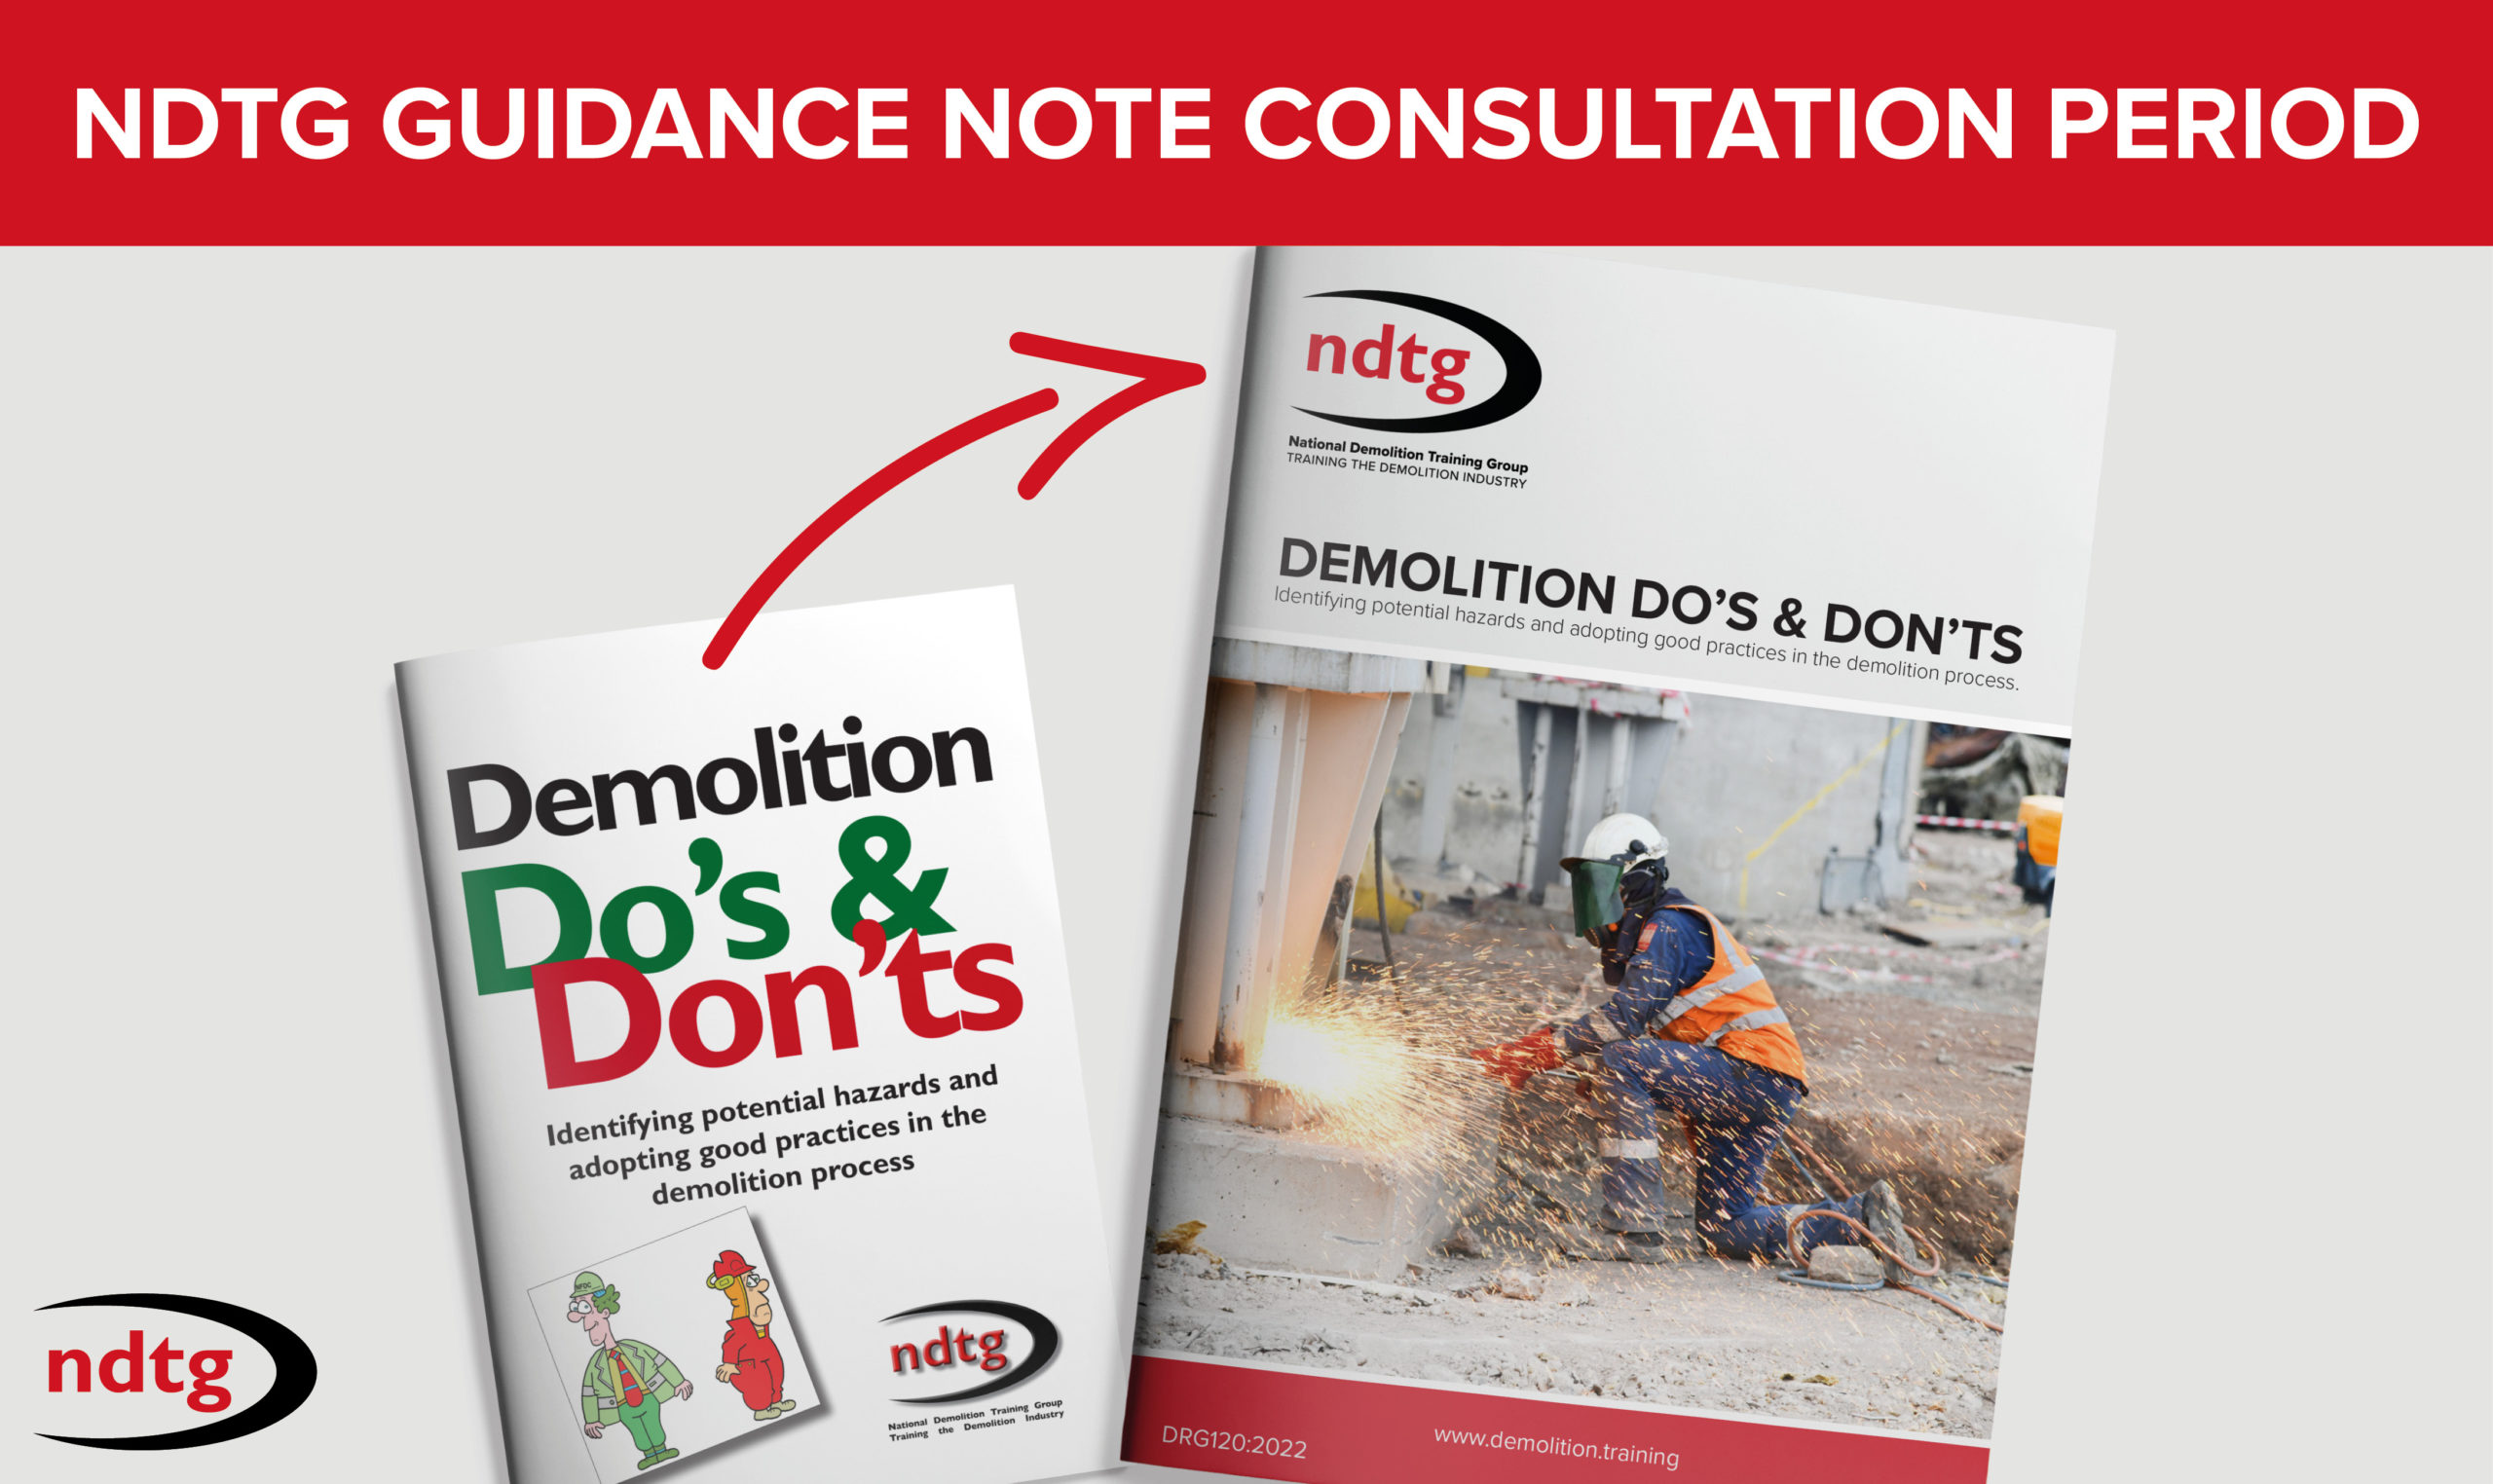 ‘Demolition Do’s and Don’ts’ Guidance Note Consultation Period